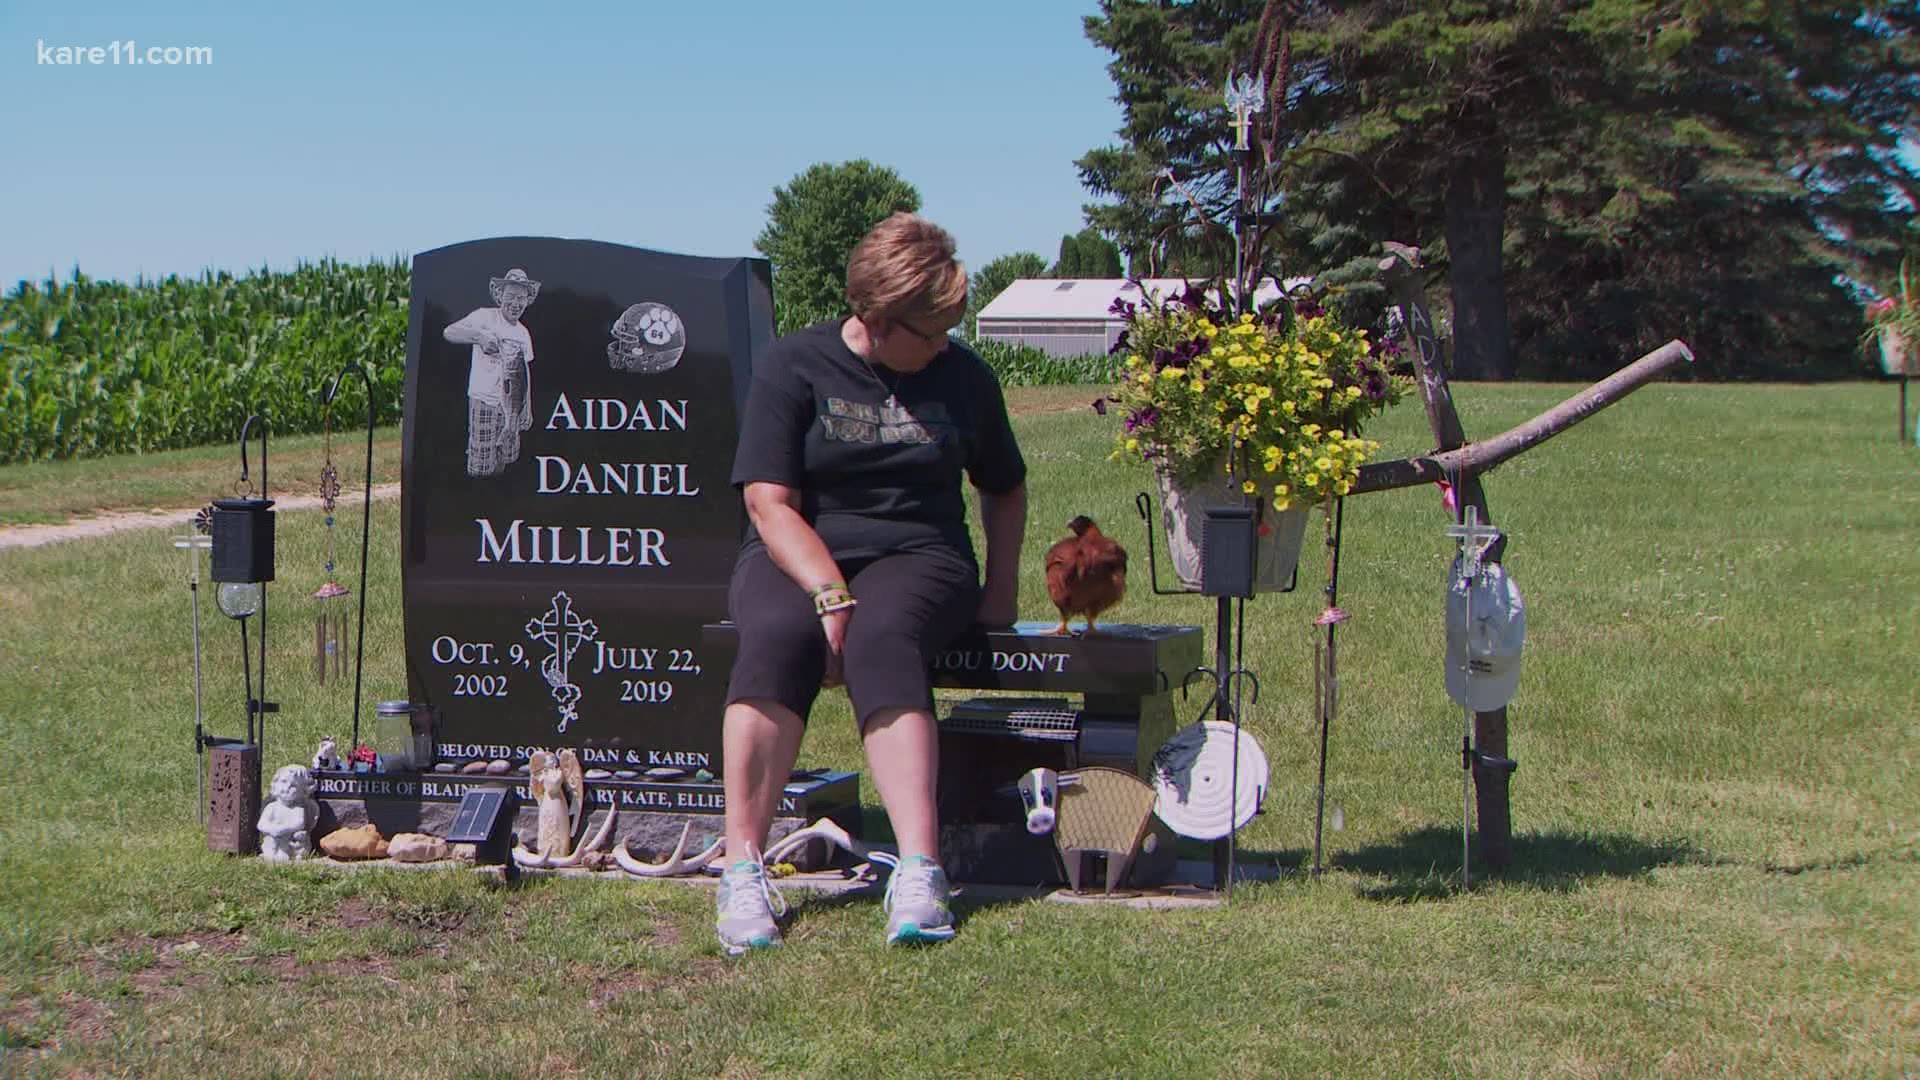 The little red hen arrived at the grave of Aidan Miller just before the one year anniversary of his death